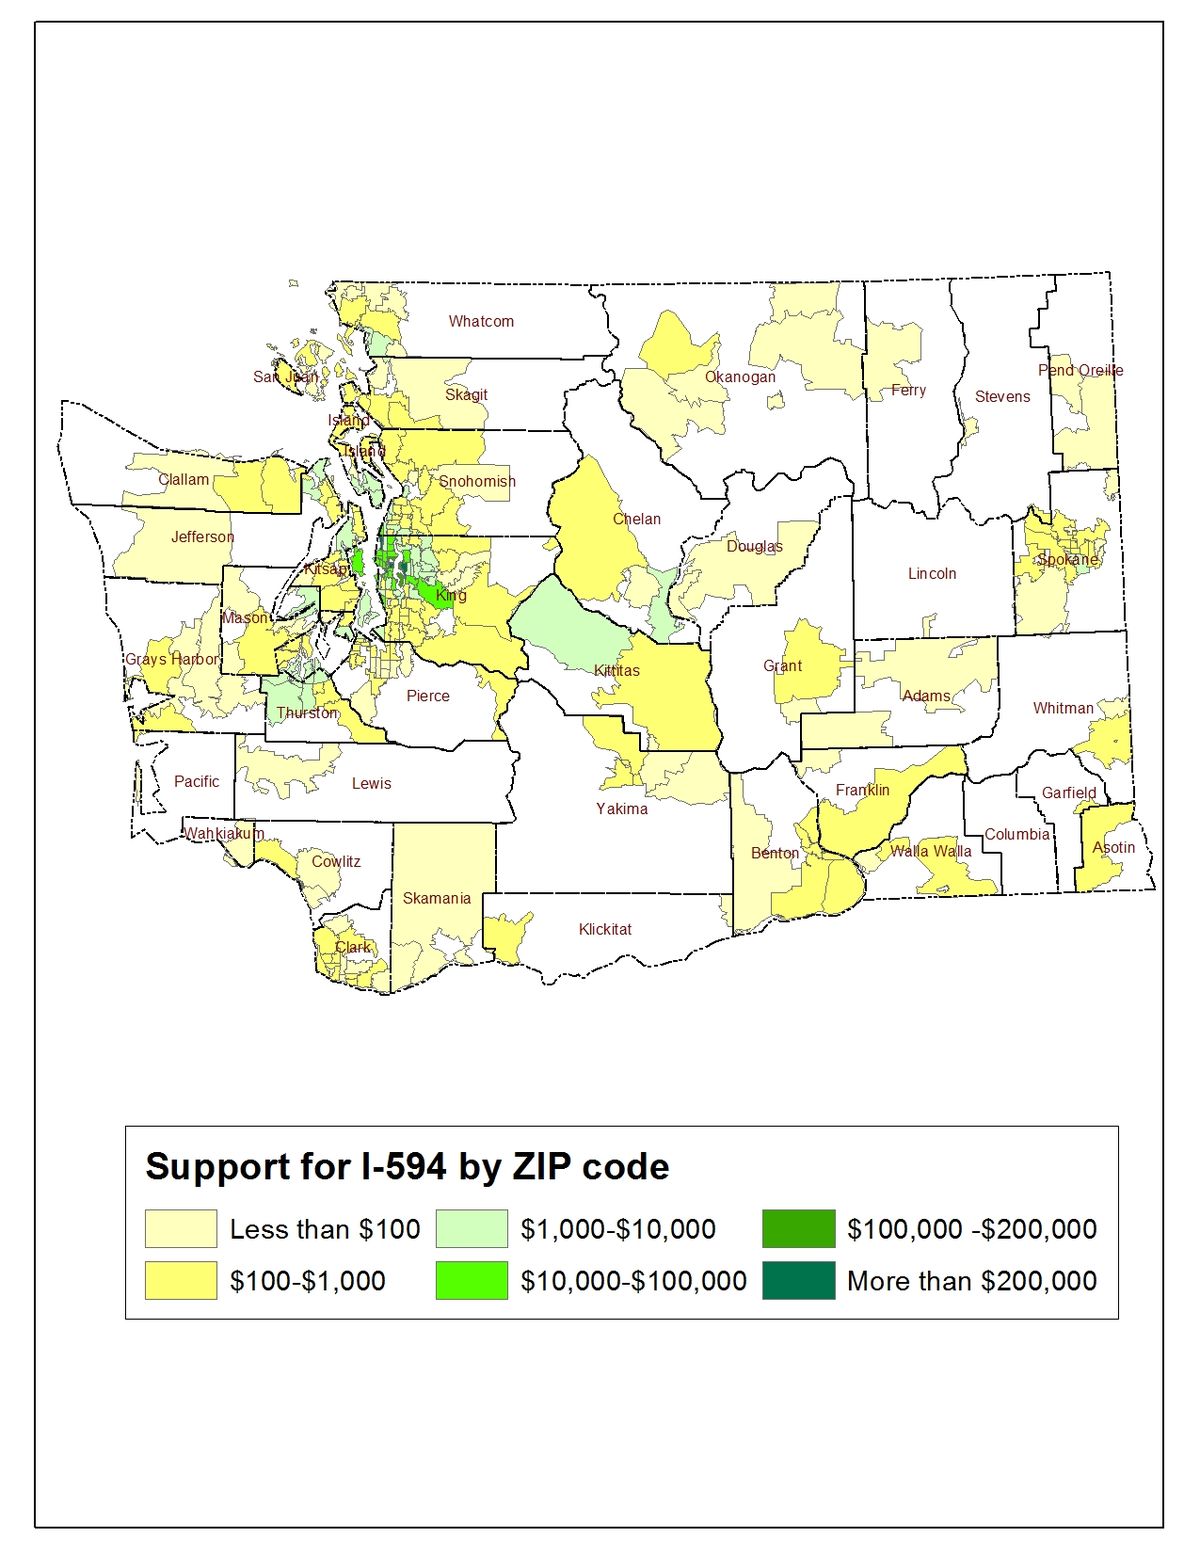 This is a map of the contributions to I-594 by Washington State ZIP code (Jim Camden)